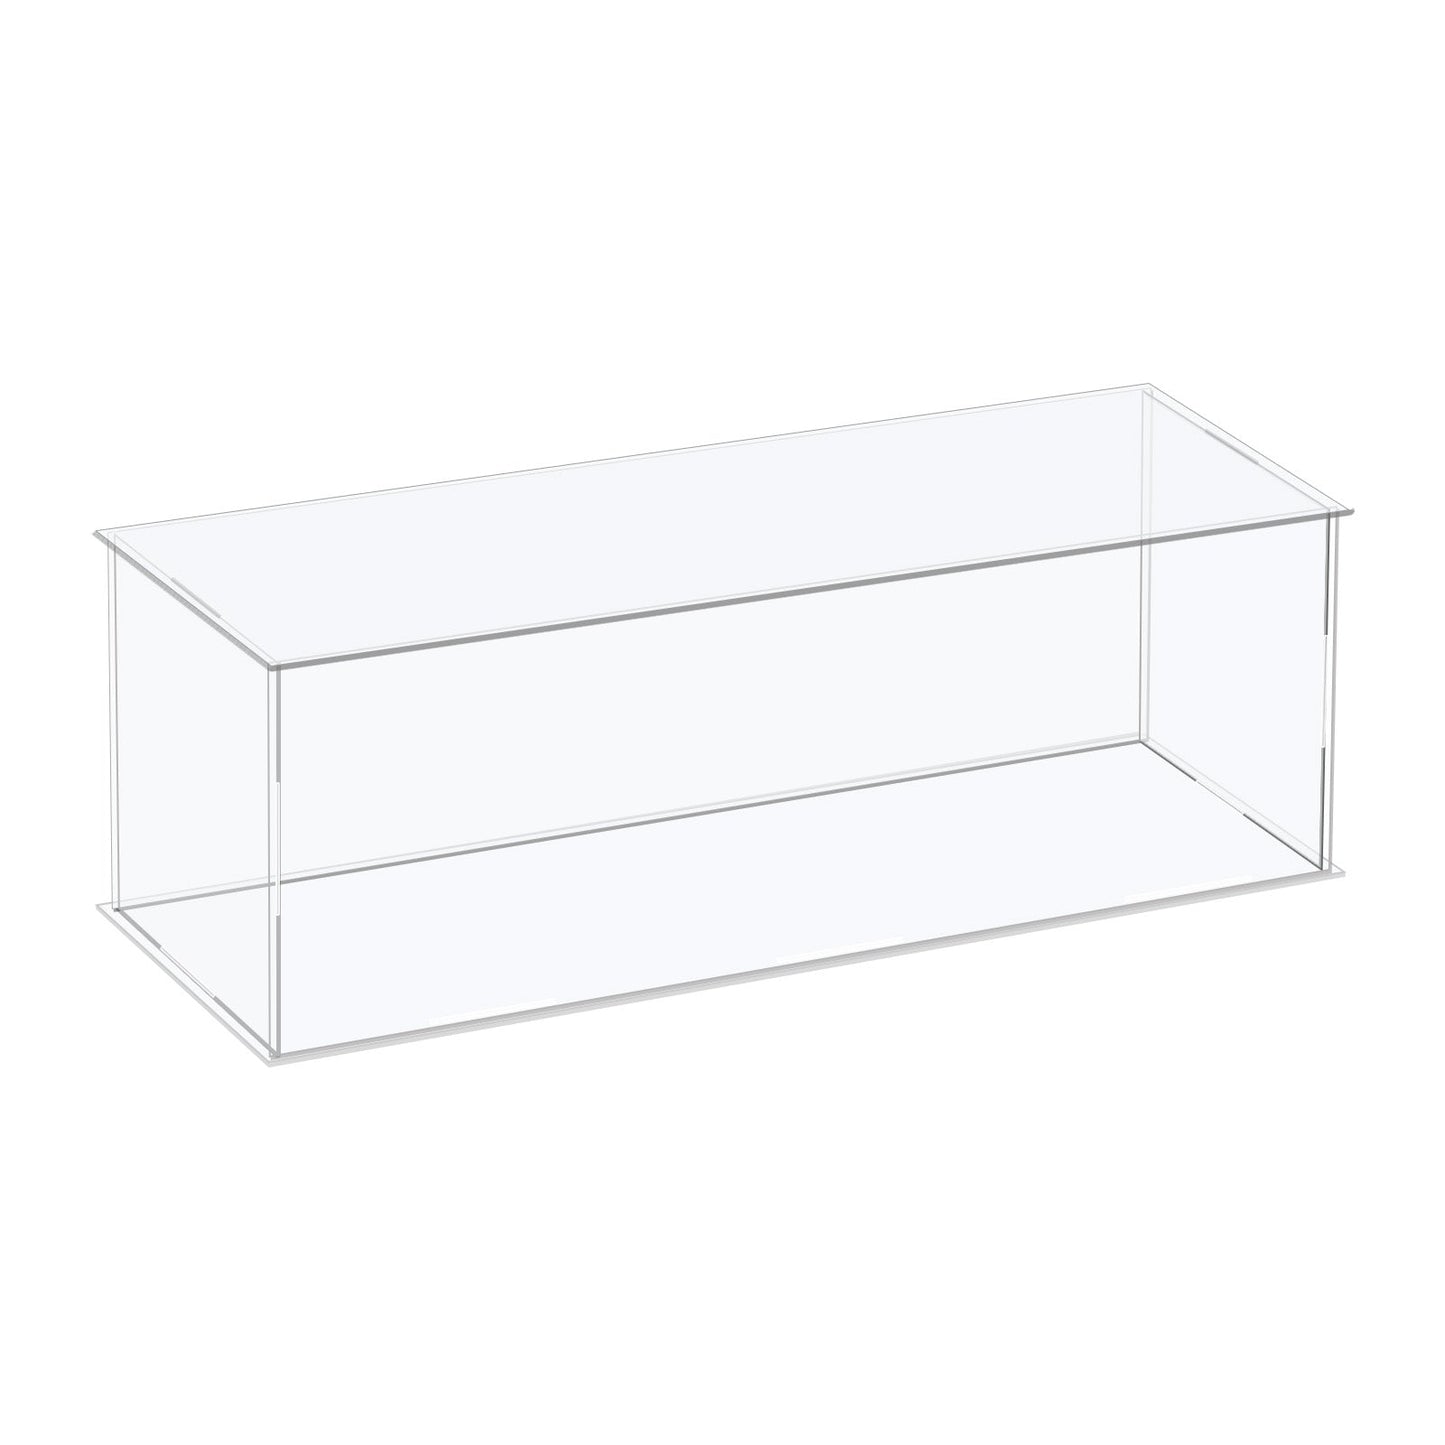 4-inch Tall Custom Size Assembly Acrylic Display Case With Clear Base